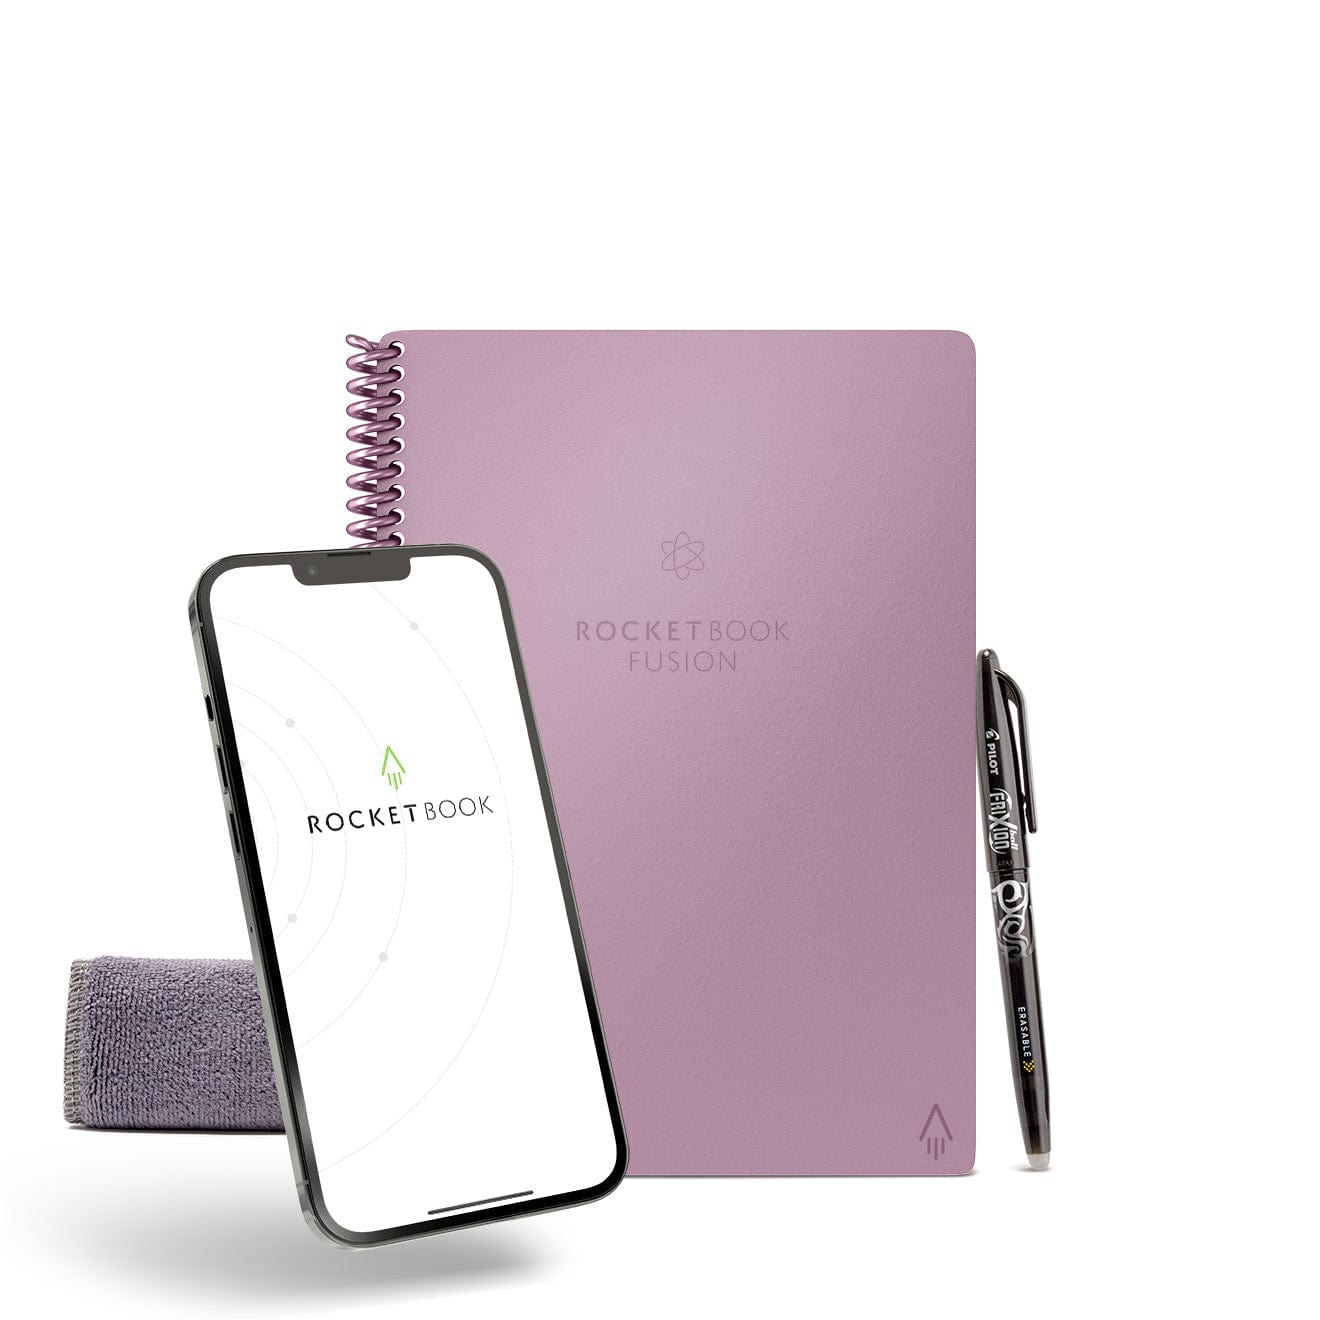 Rocketbook Planner & Notebook, Fusion : Reusable Smart Planner & Notebook |  Improve Productivity with Digitally Connected Notebook Planner | Dotted